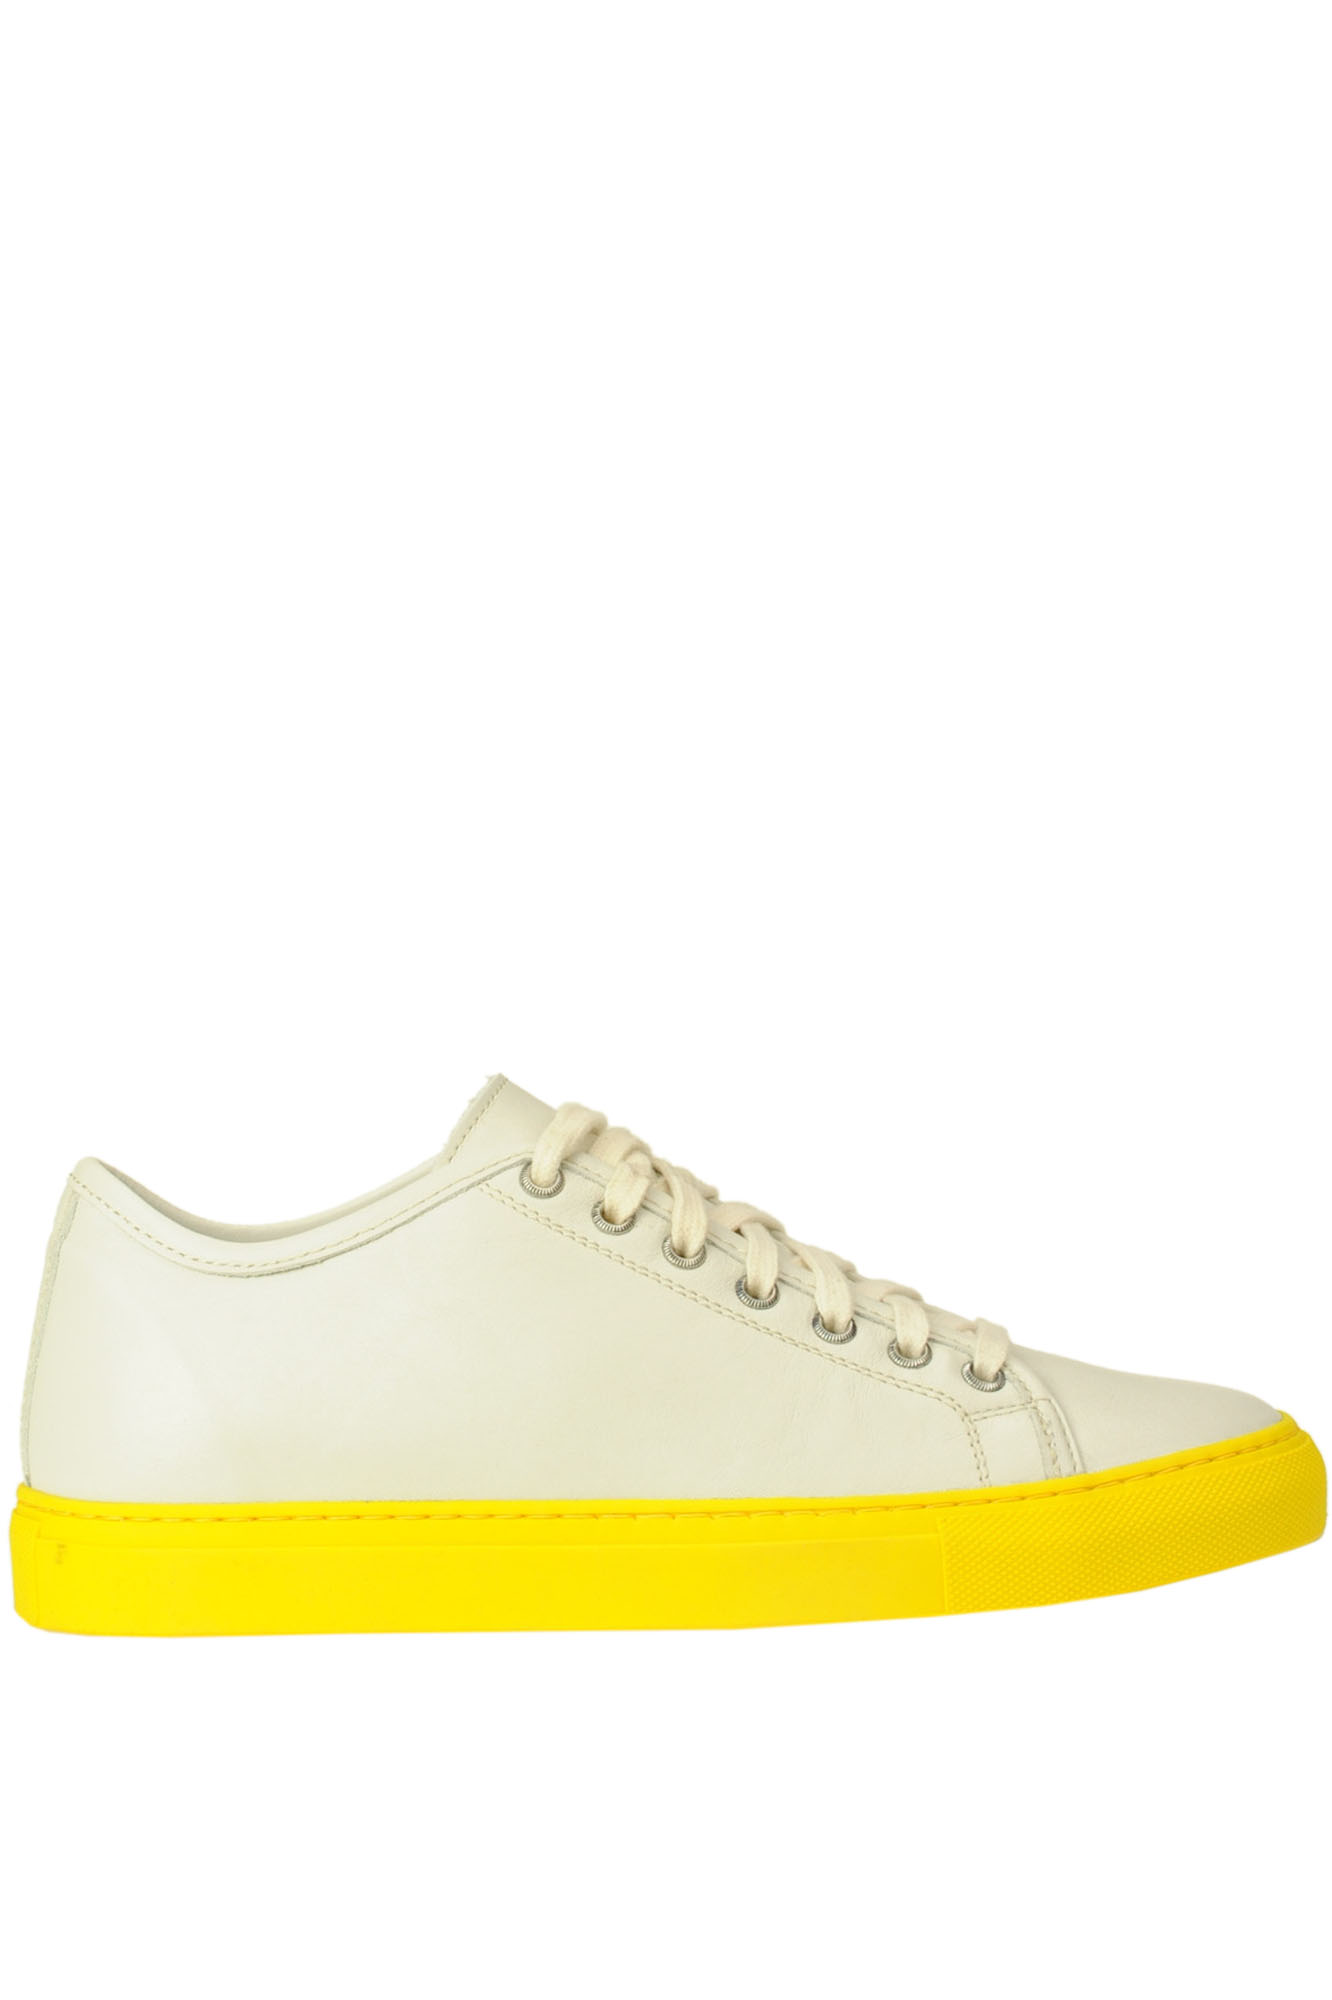 SOFIE D'HOORE FRIDA LEATHER SNEAKERS